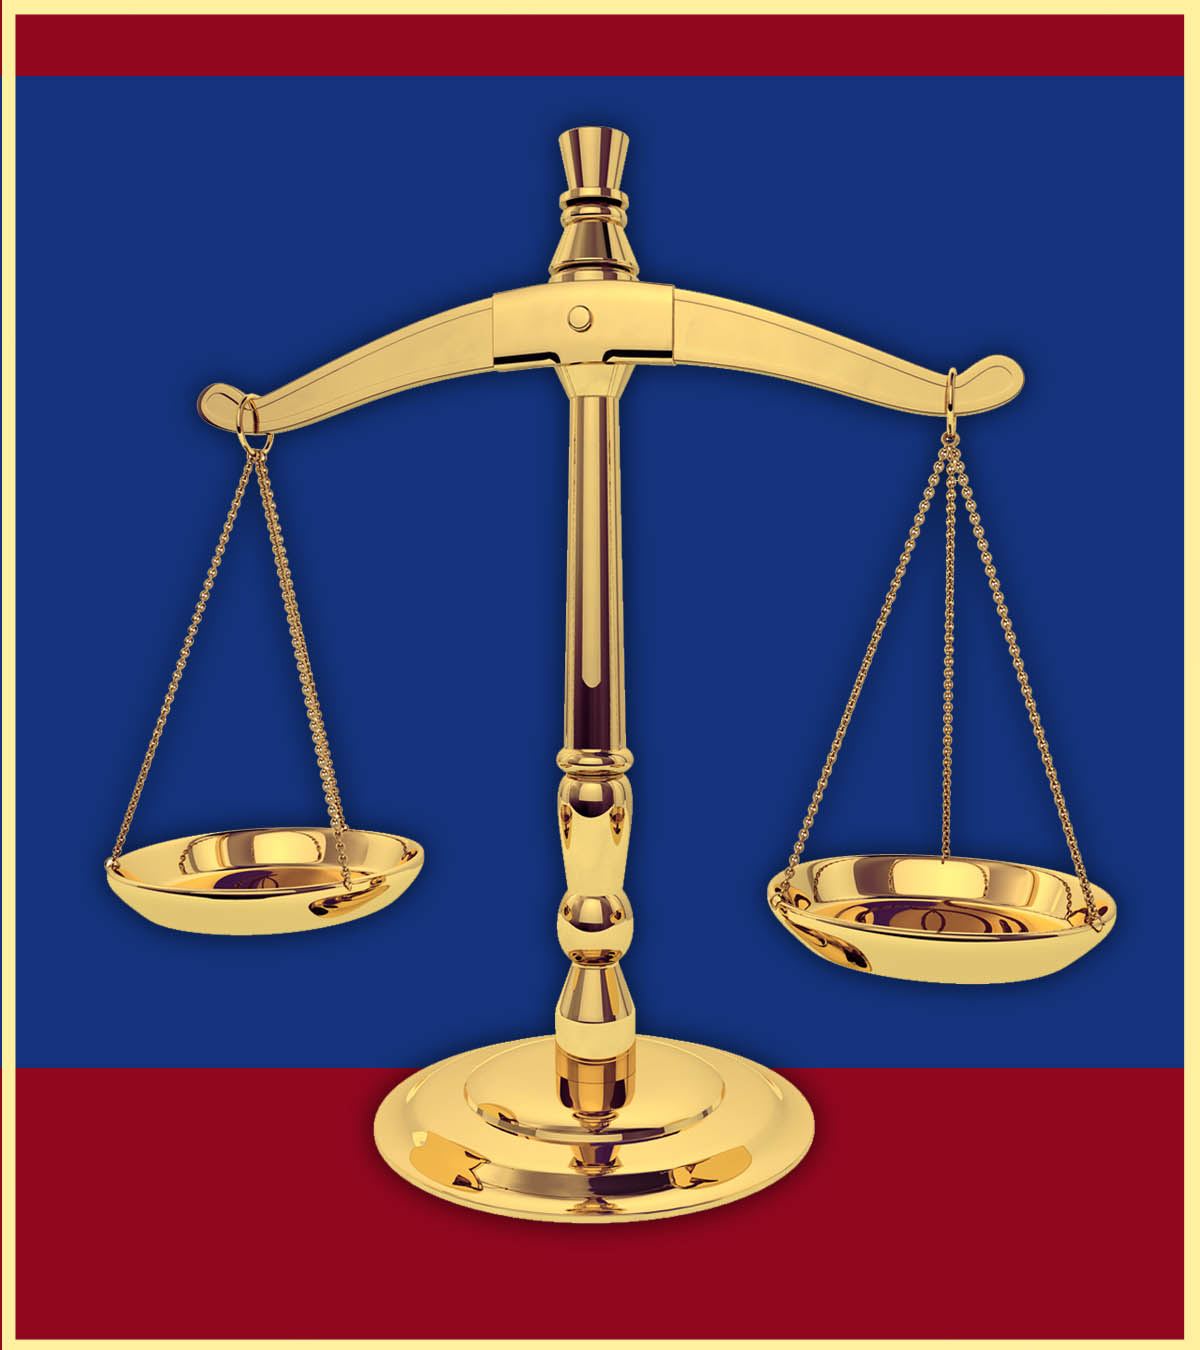 gold Justice Scales with blue and red background with gold border